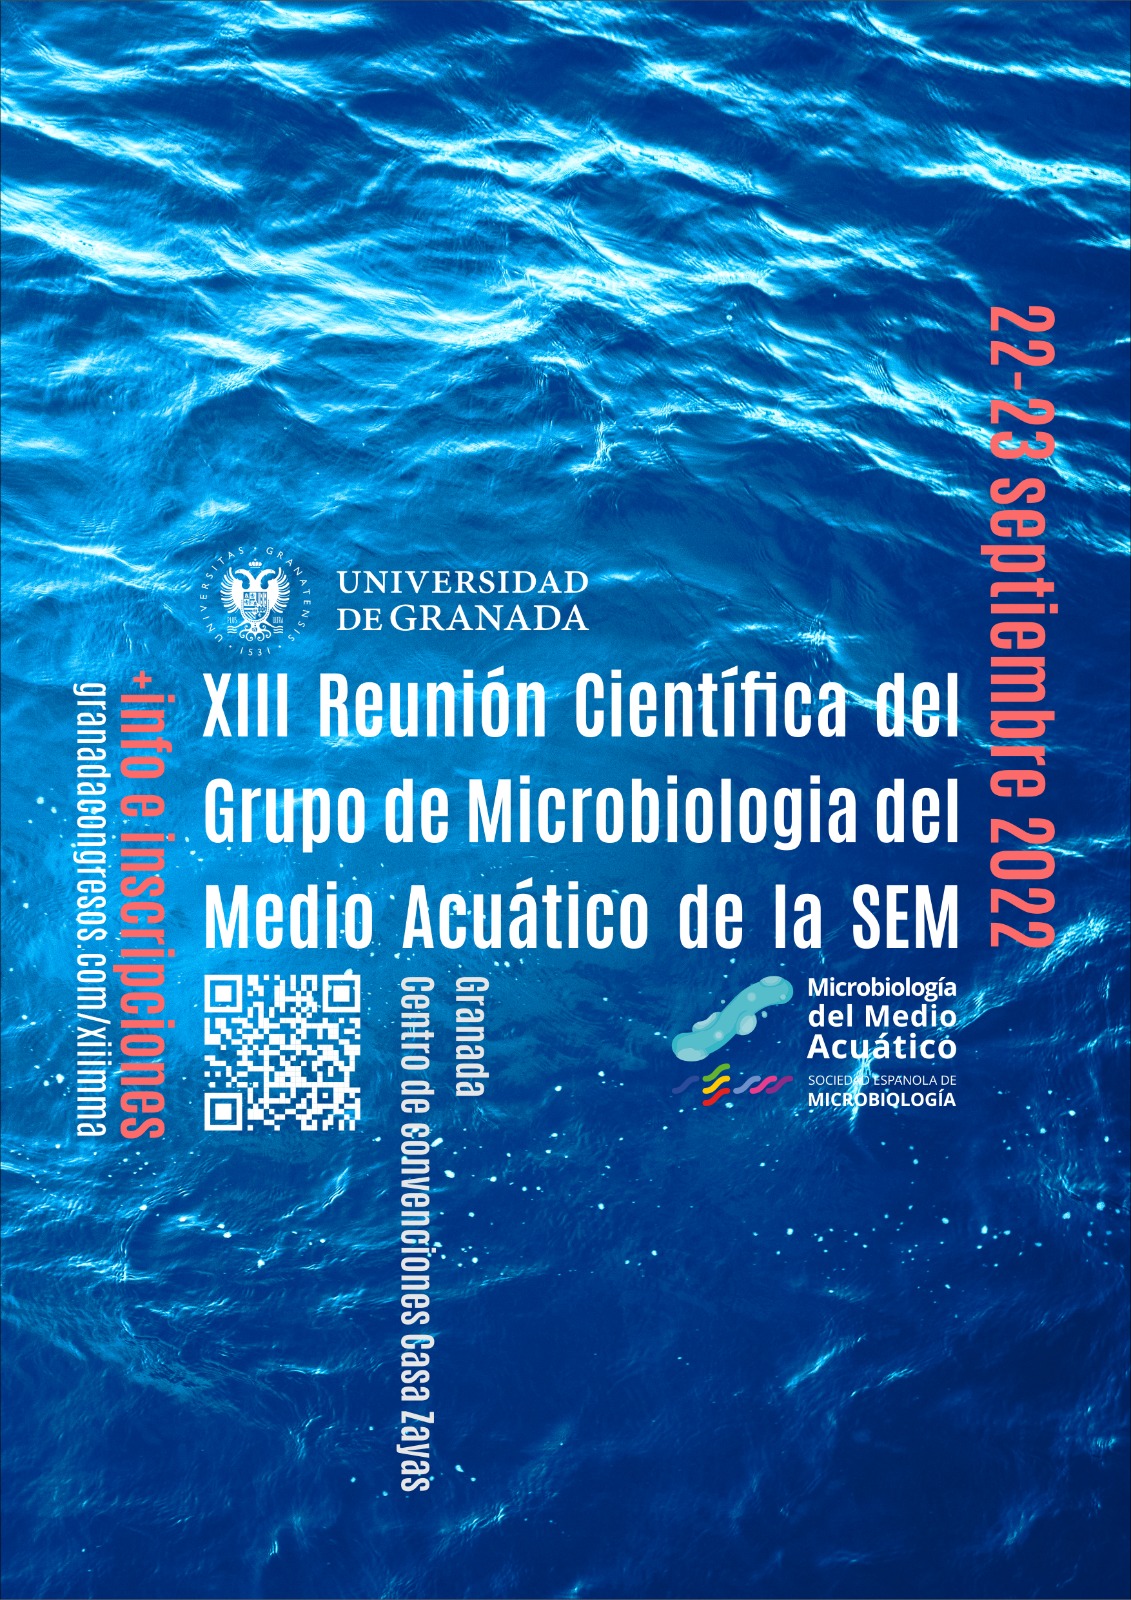 XIII Scientific Meeting of the SEM Aquatic Environment Microbiology Group